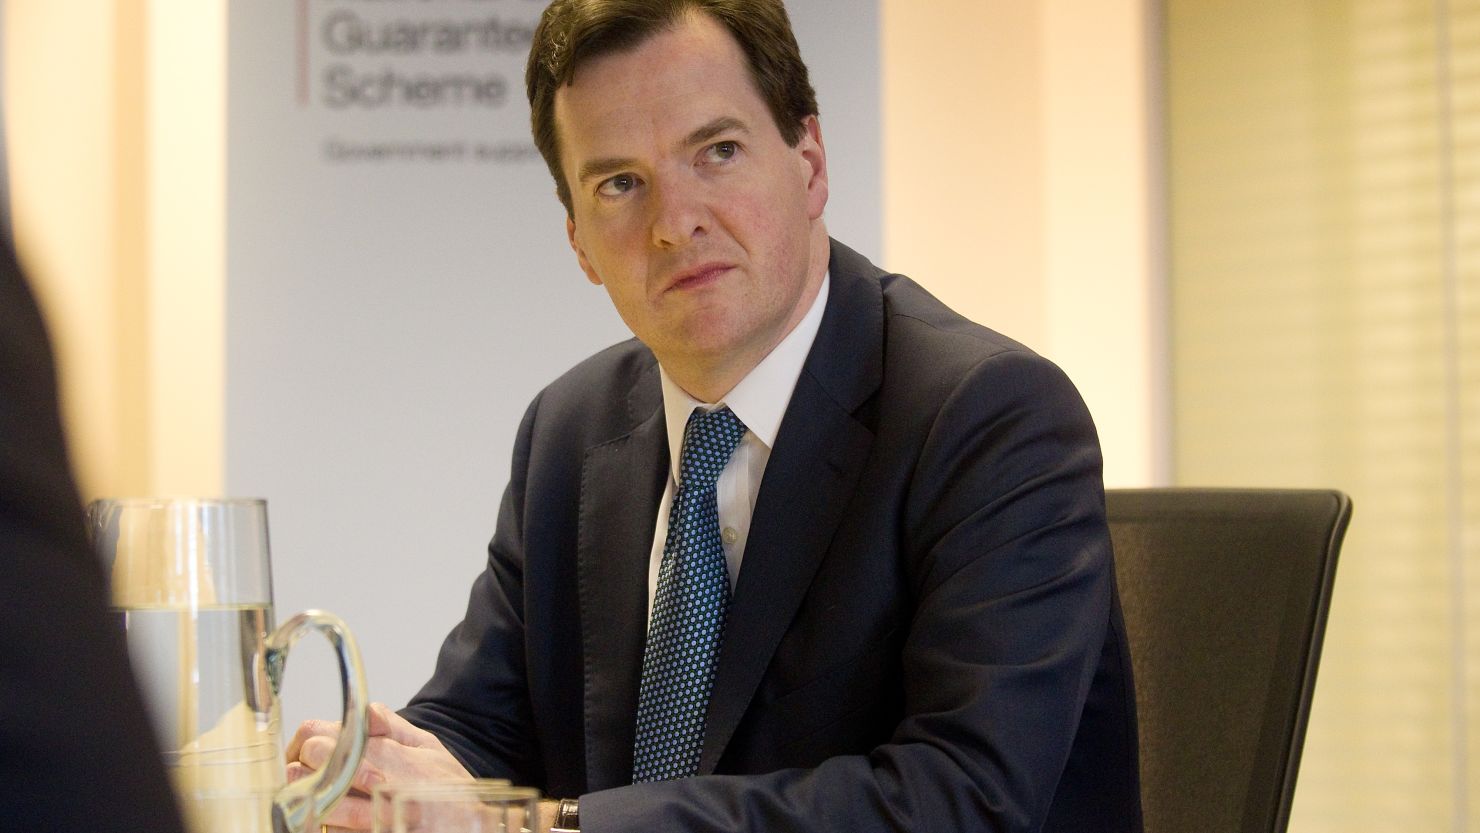 Mr Osborne also promised government guarantees for another £40bn of infrastructure projects.